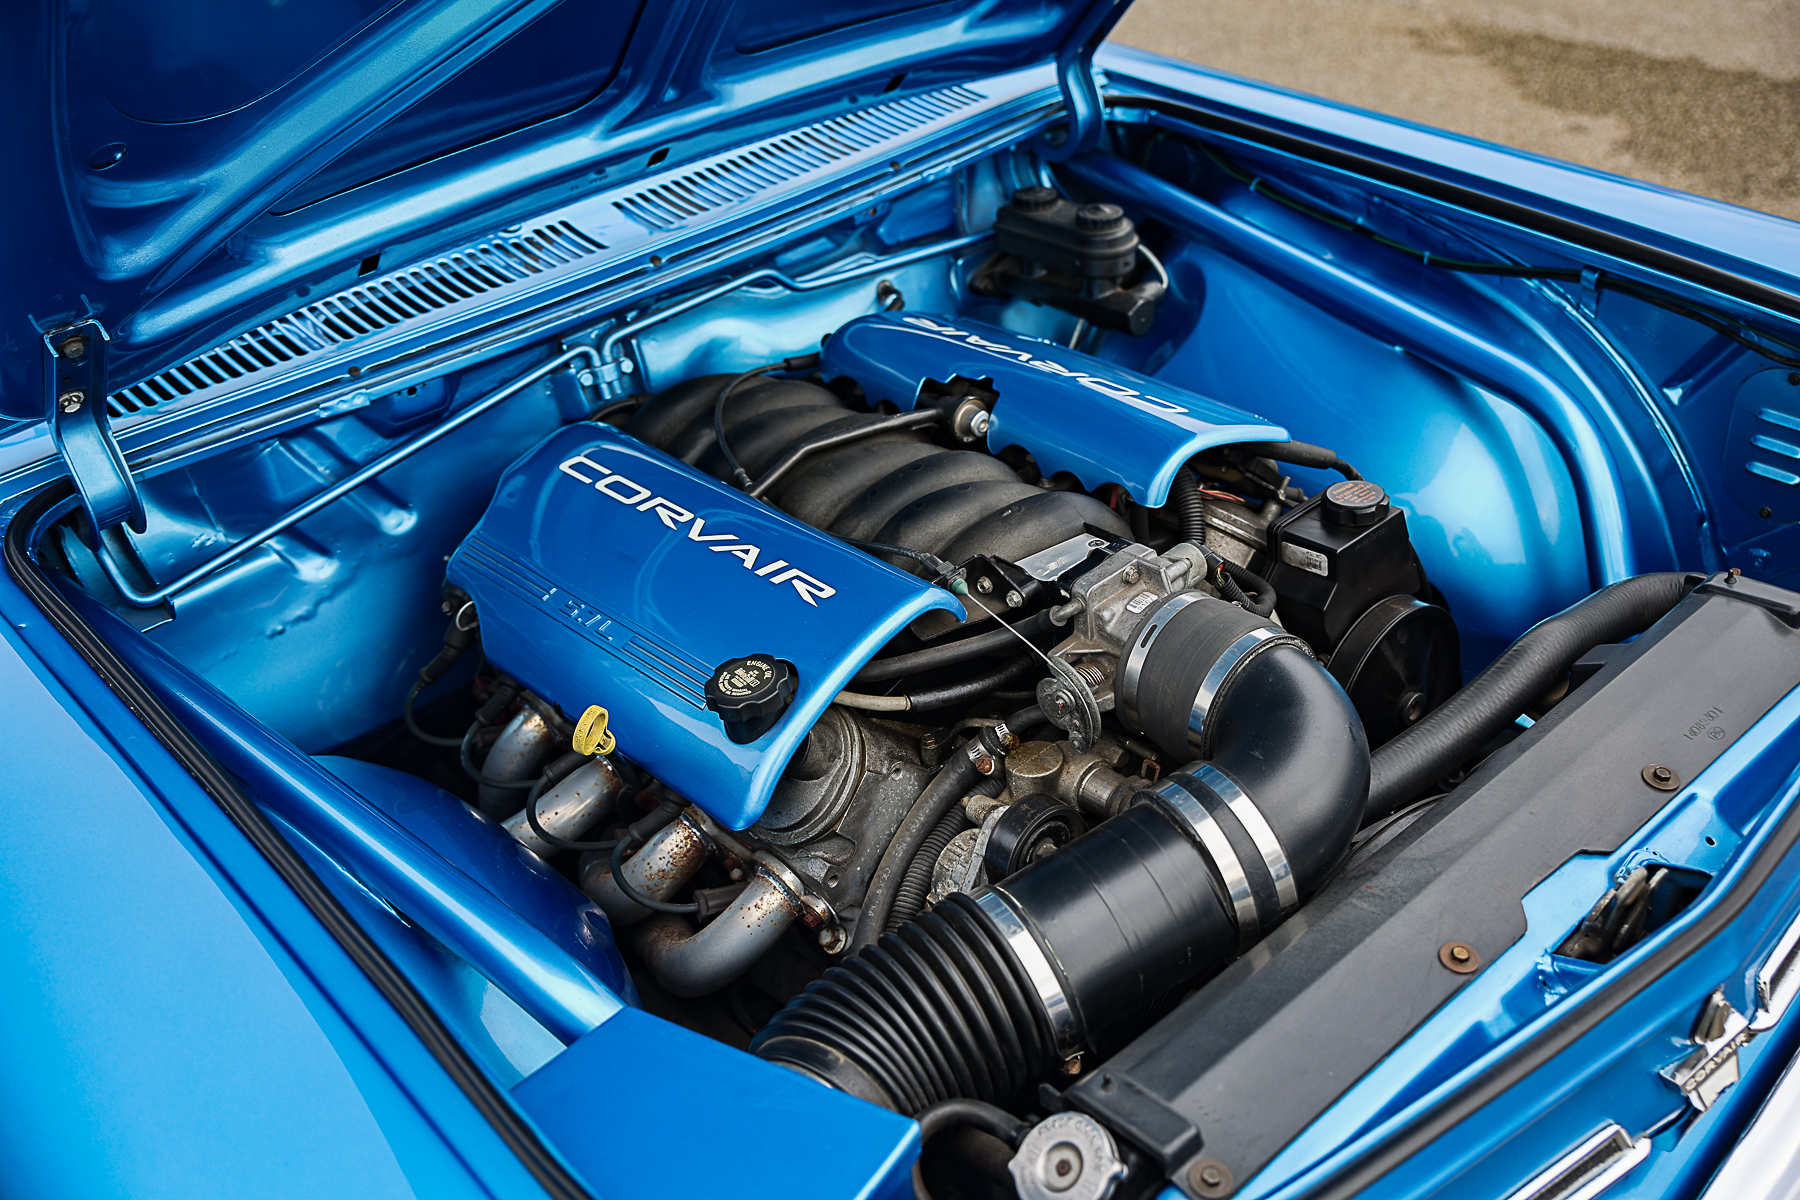 Why The LS Engine Is So Popular For V8 Engine Swaps